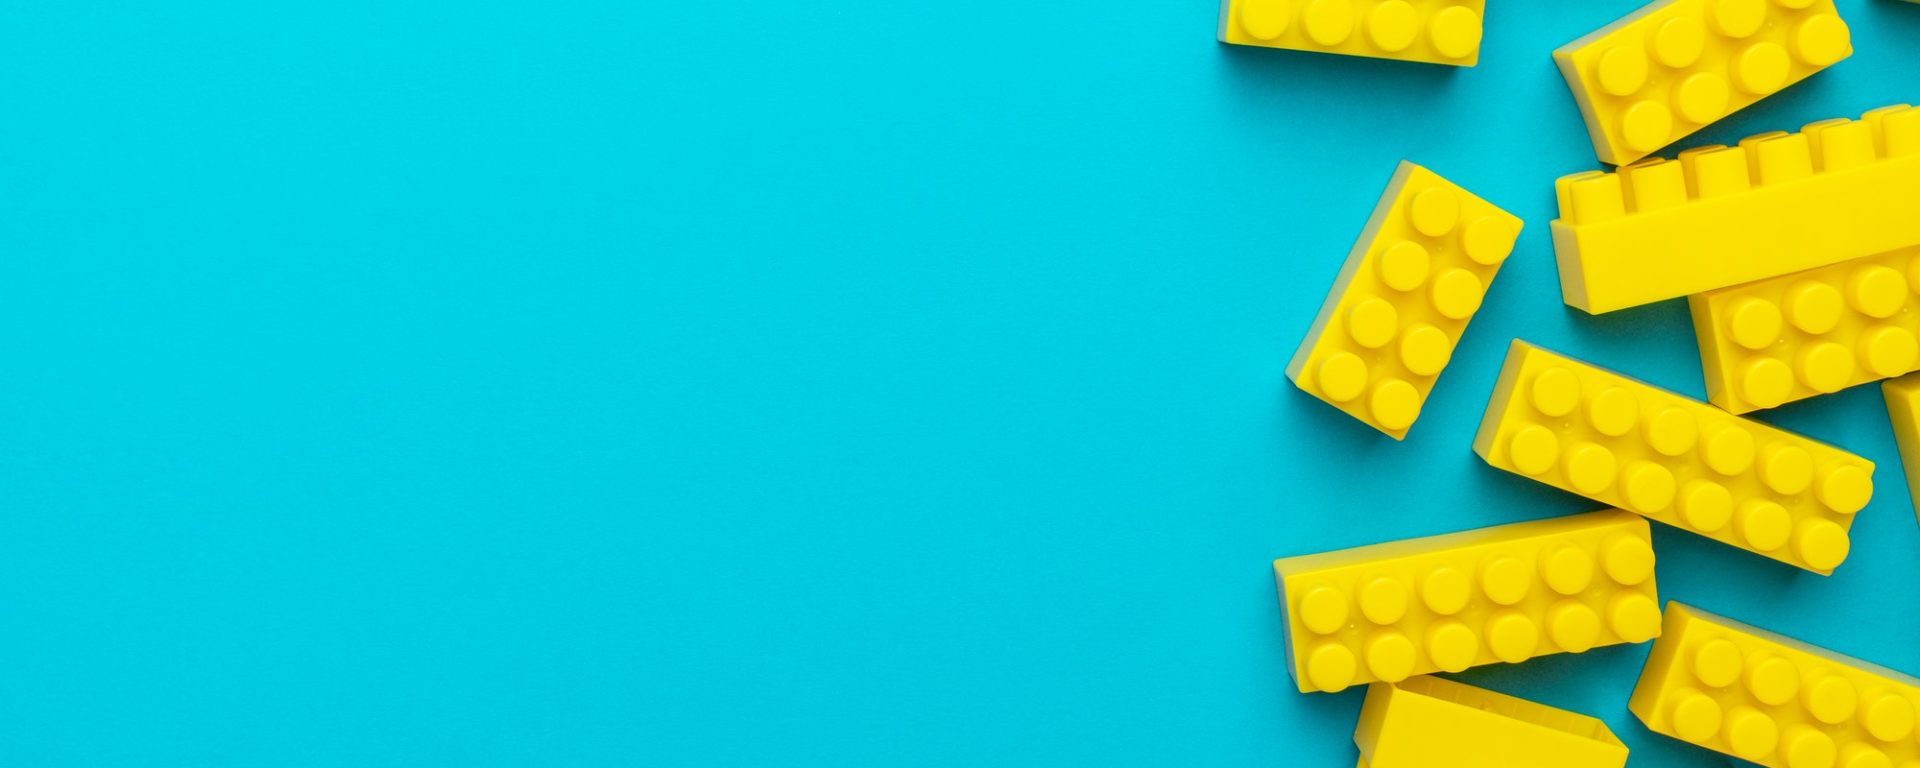 Yellow Plastic Building Blocks On Turquoise Blue Background With Copy Space